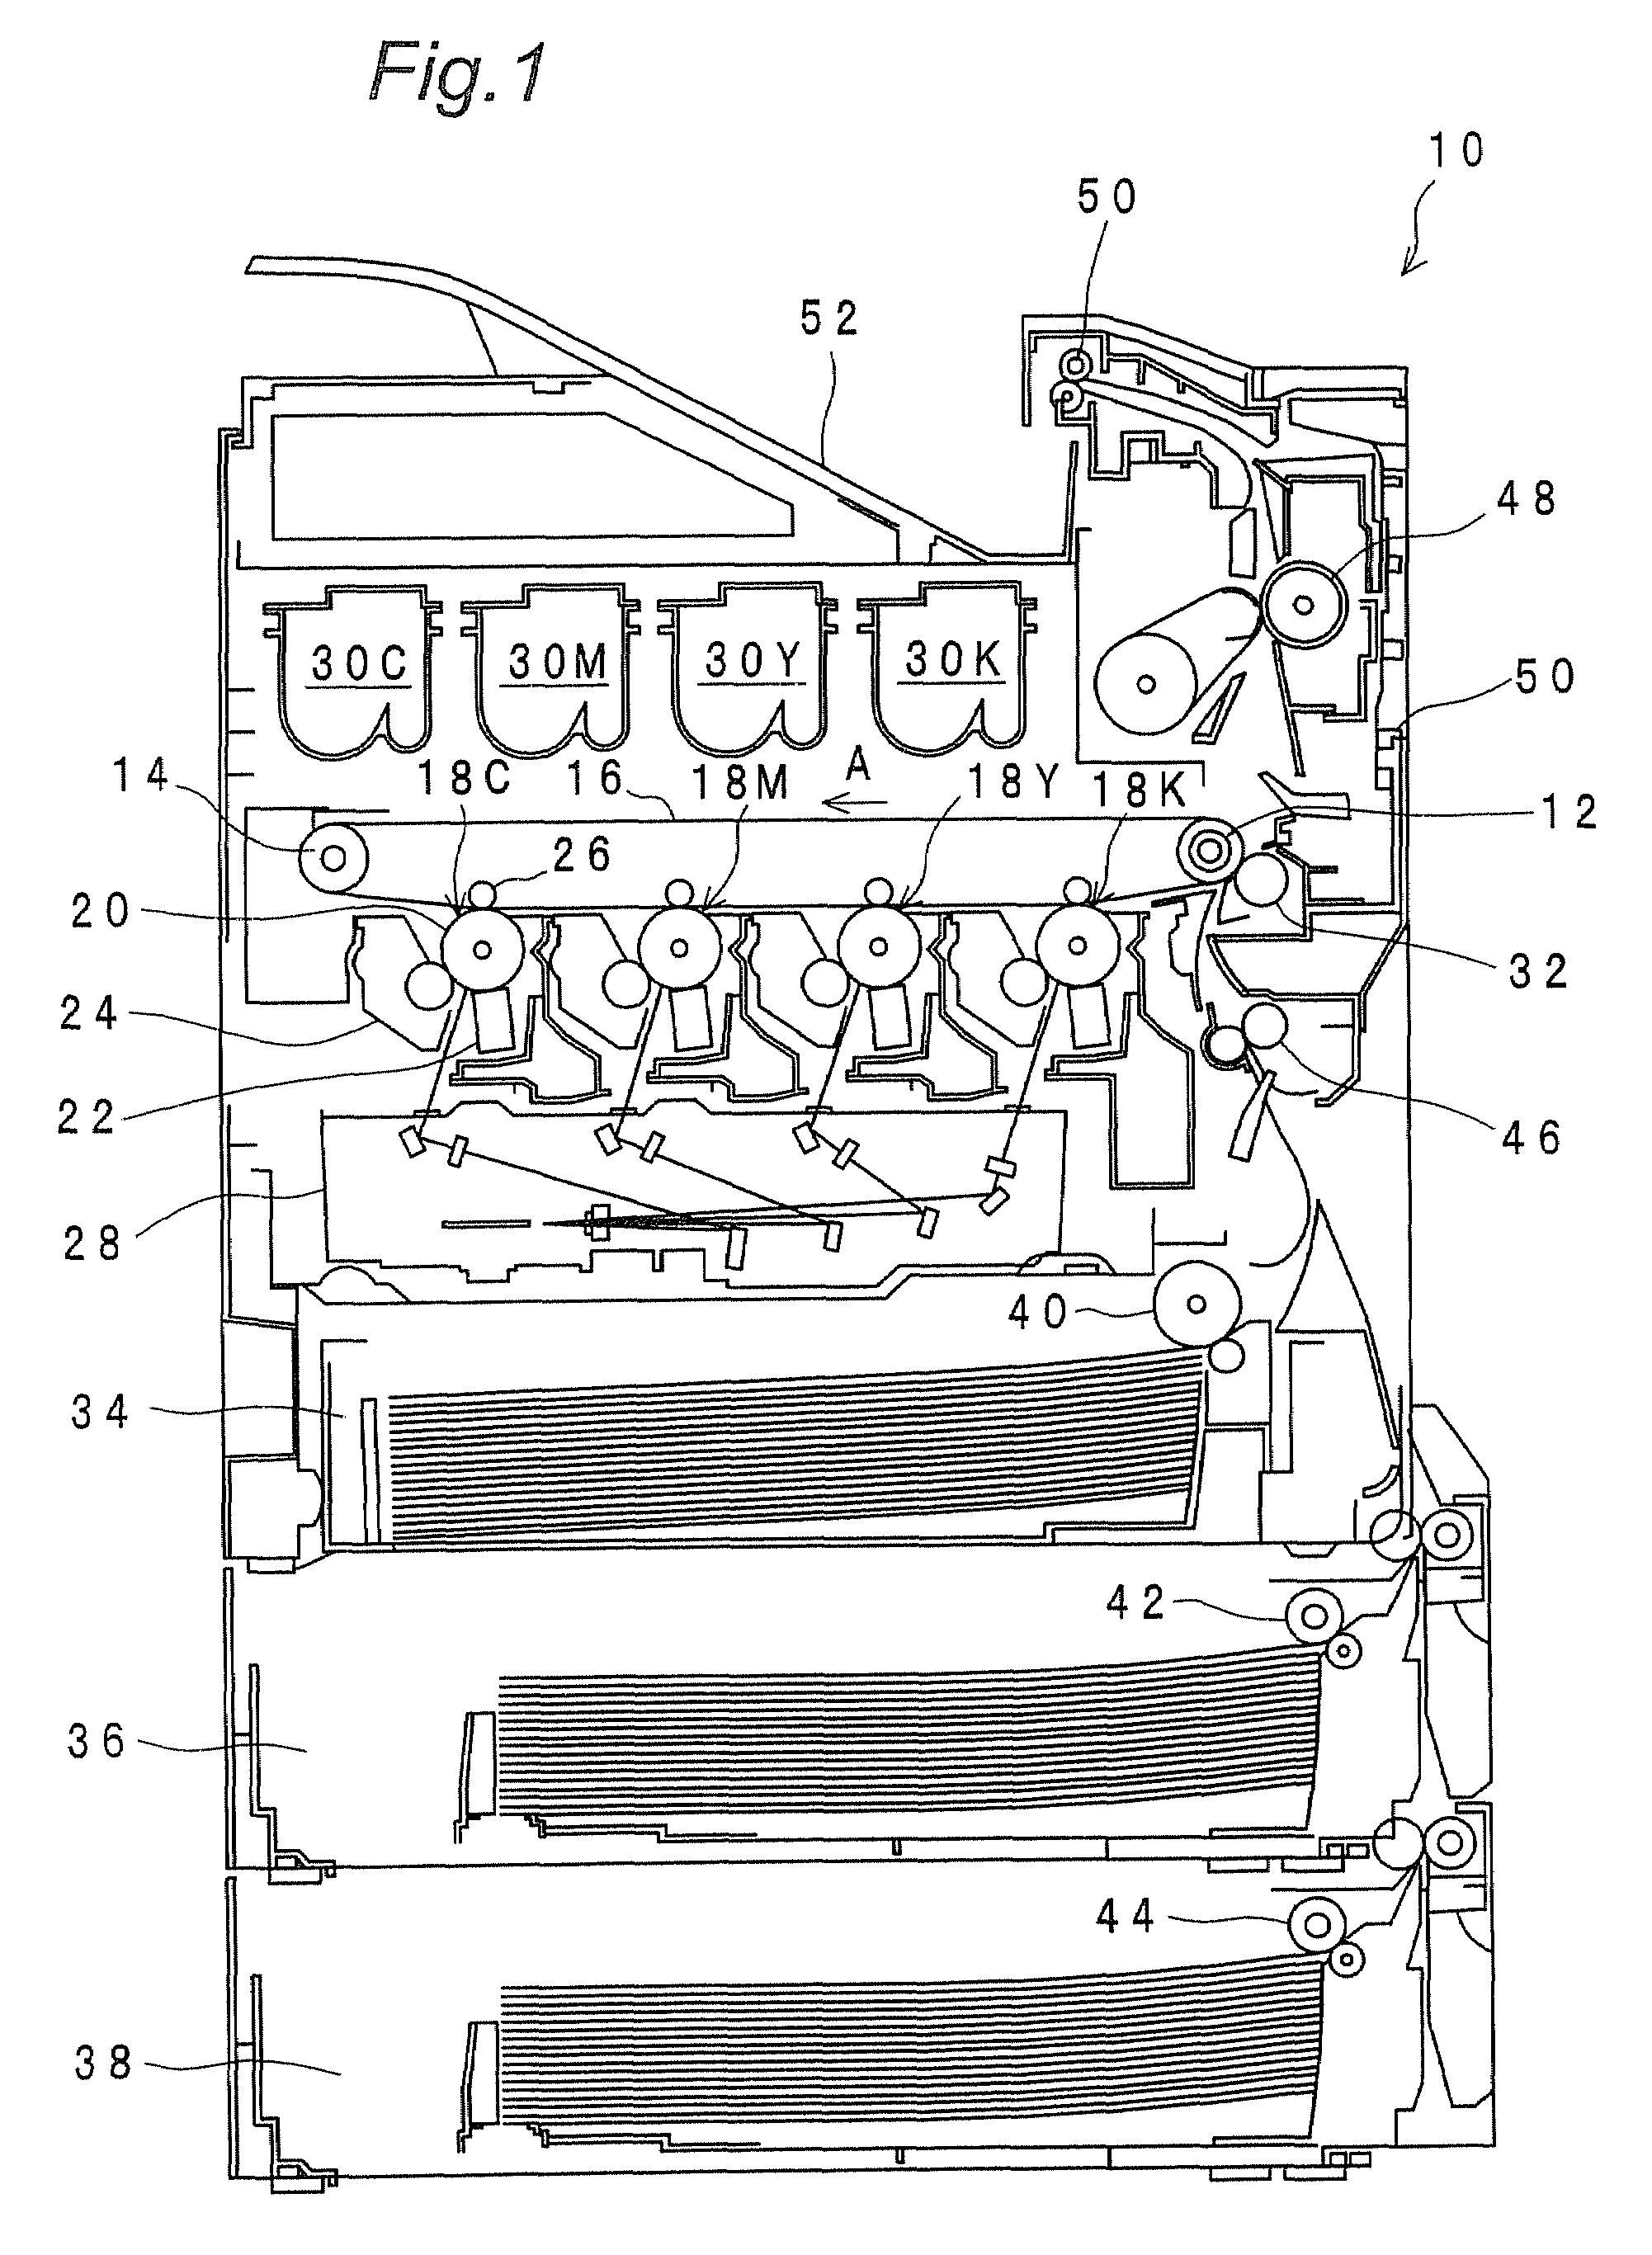 Image forming apparatus having monochrome and color print modes and a plurality of system speeds